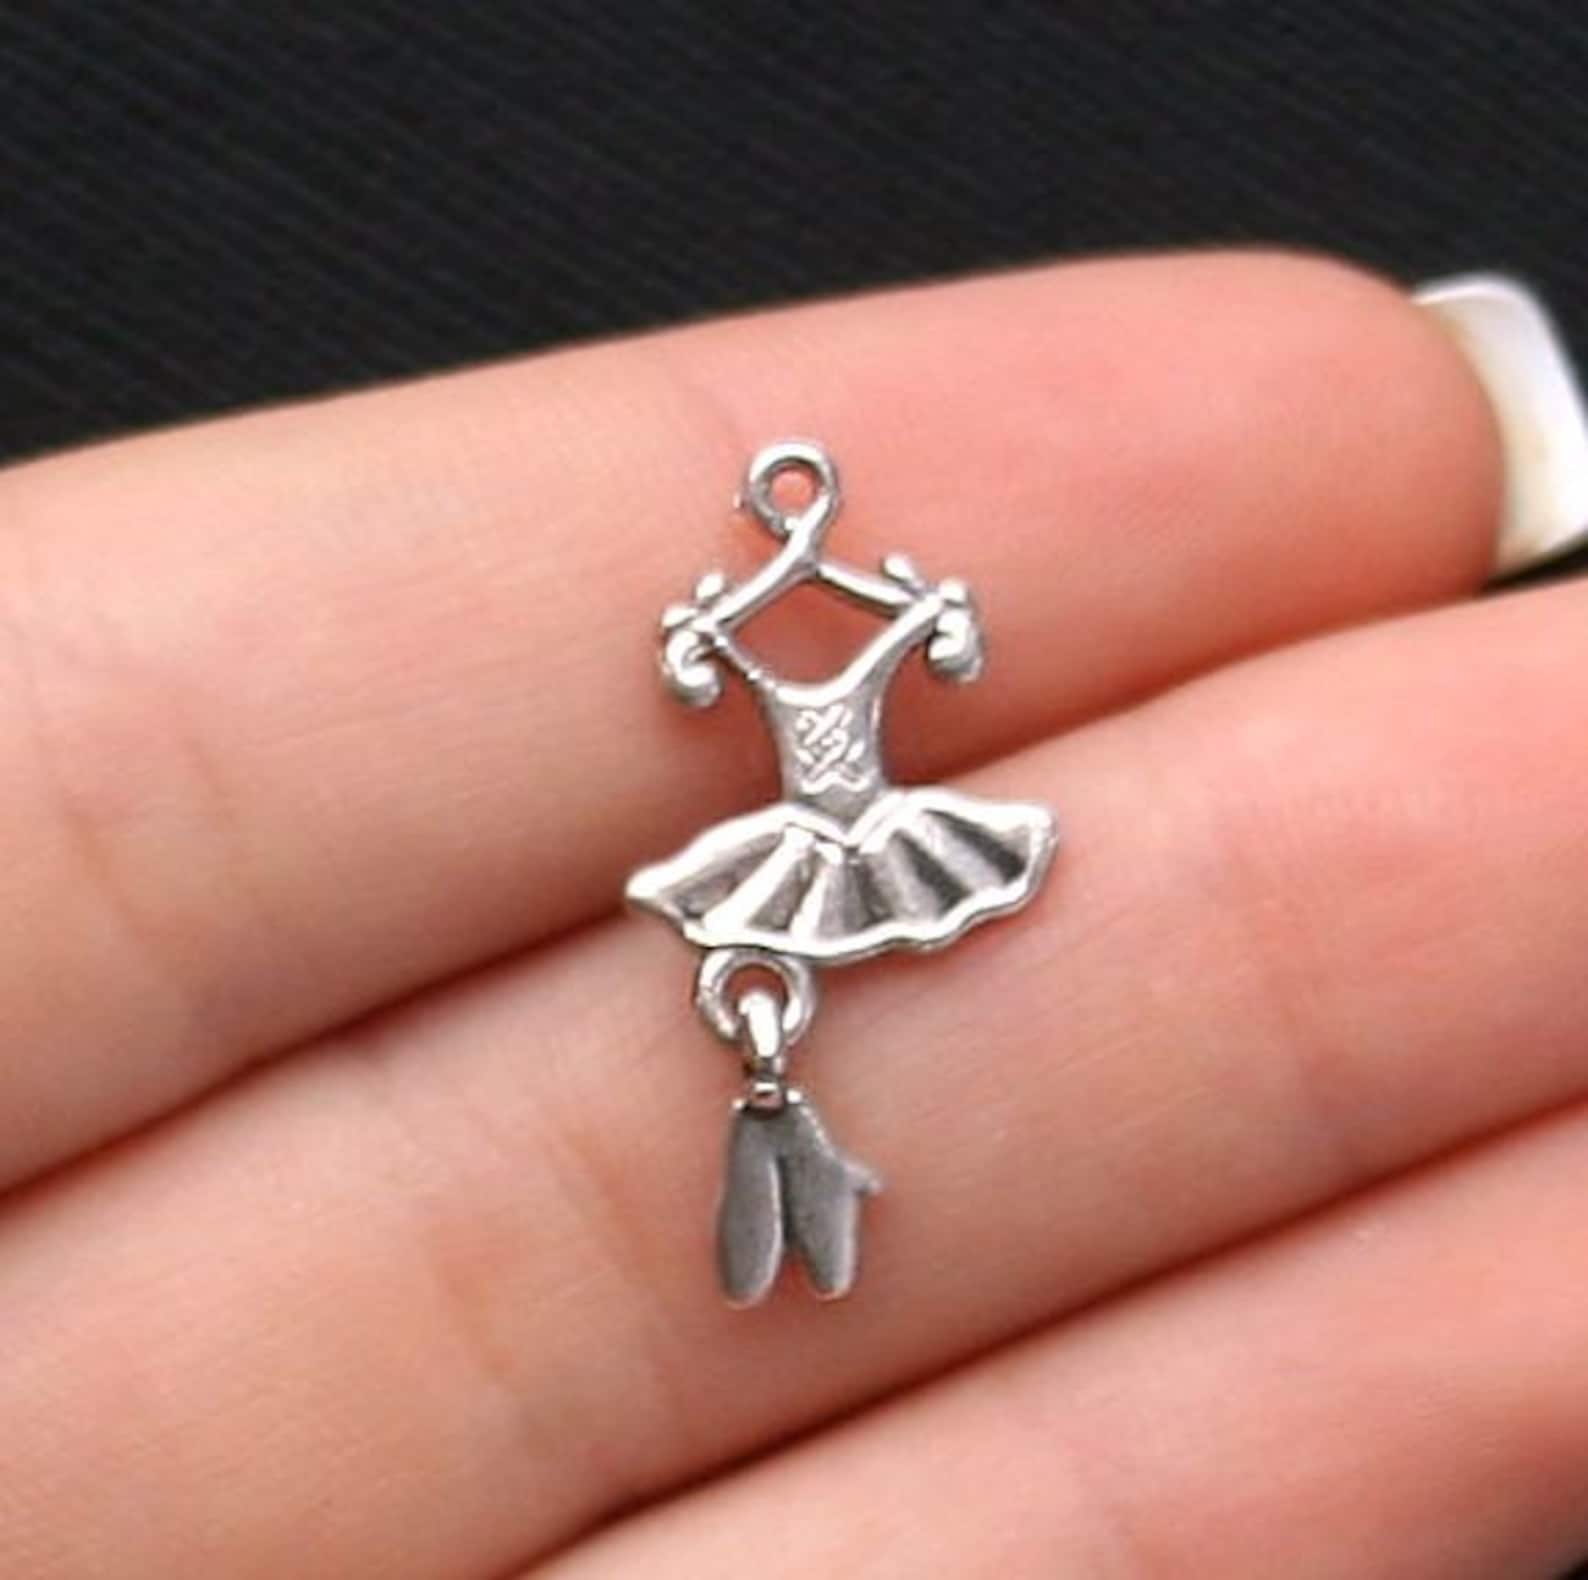 bulk 30 ballet charms antique silver tone 2 sided tutu with dangling toe shoes - sc1076